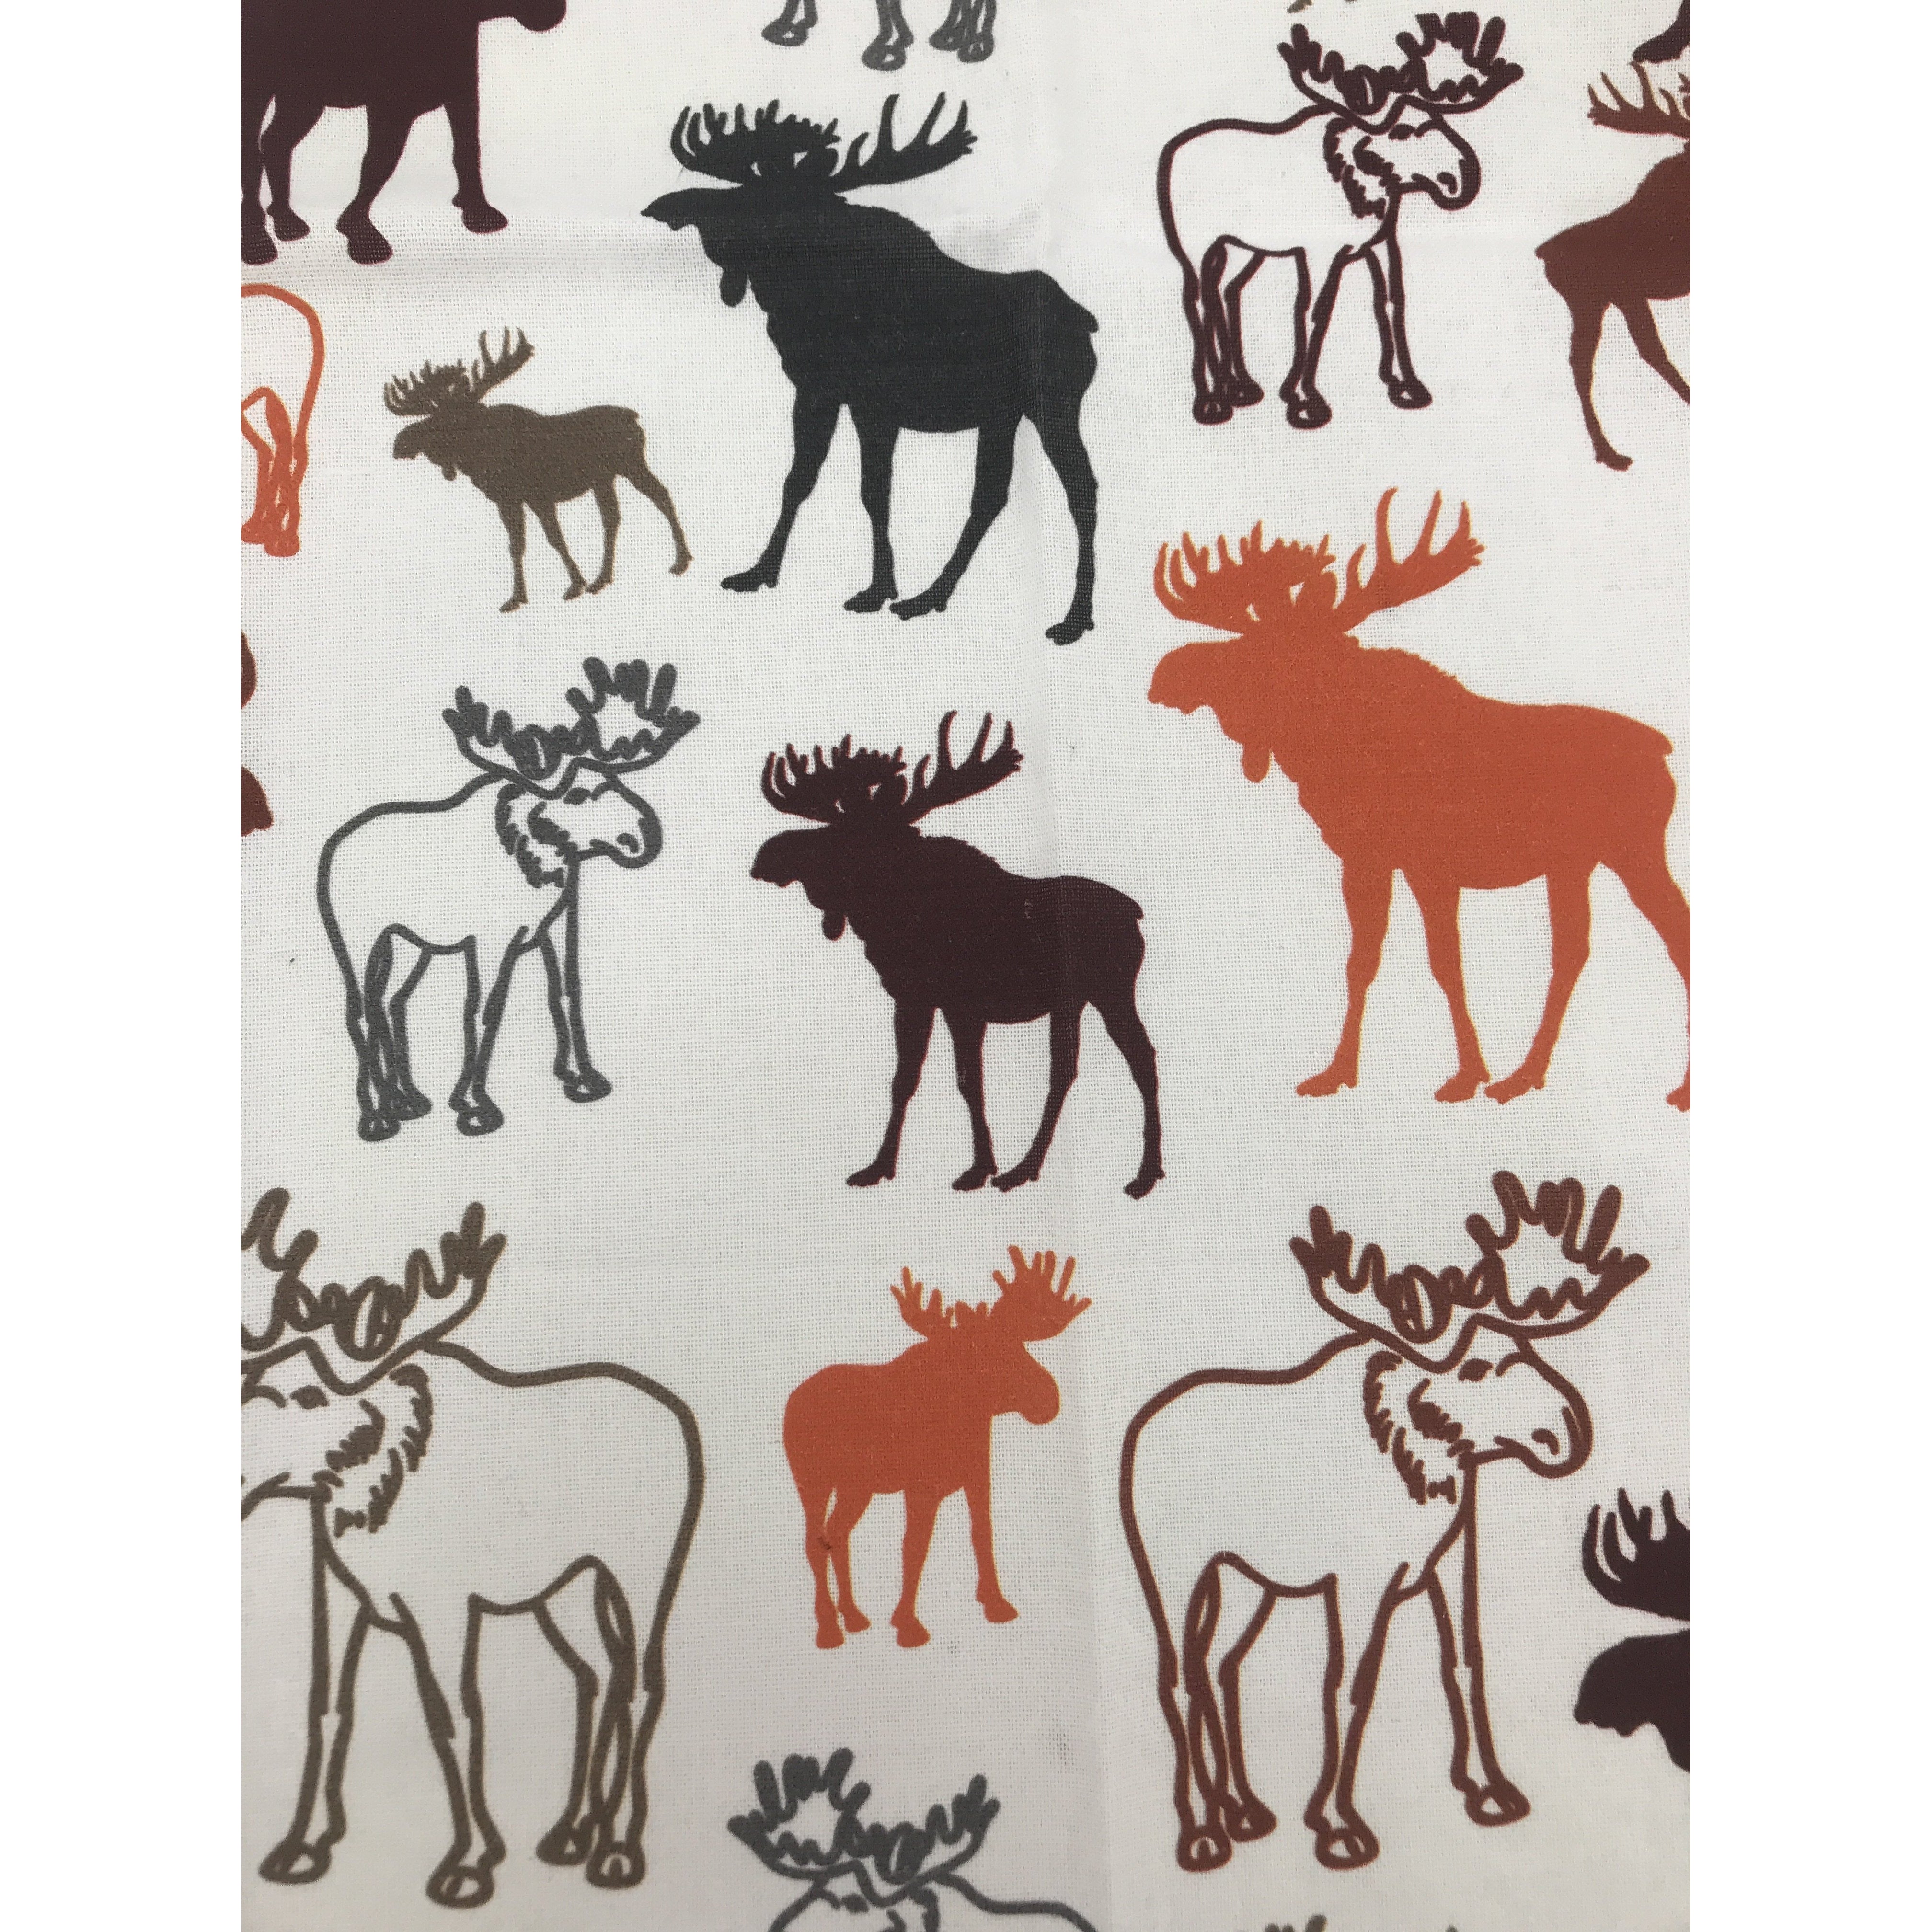 Kitchen Decorative Tea Towels: Great Outdoor Themed / Canadian Animals / Camping